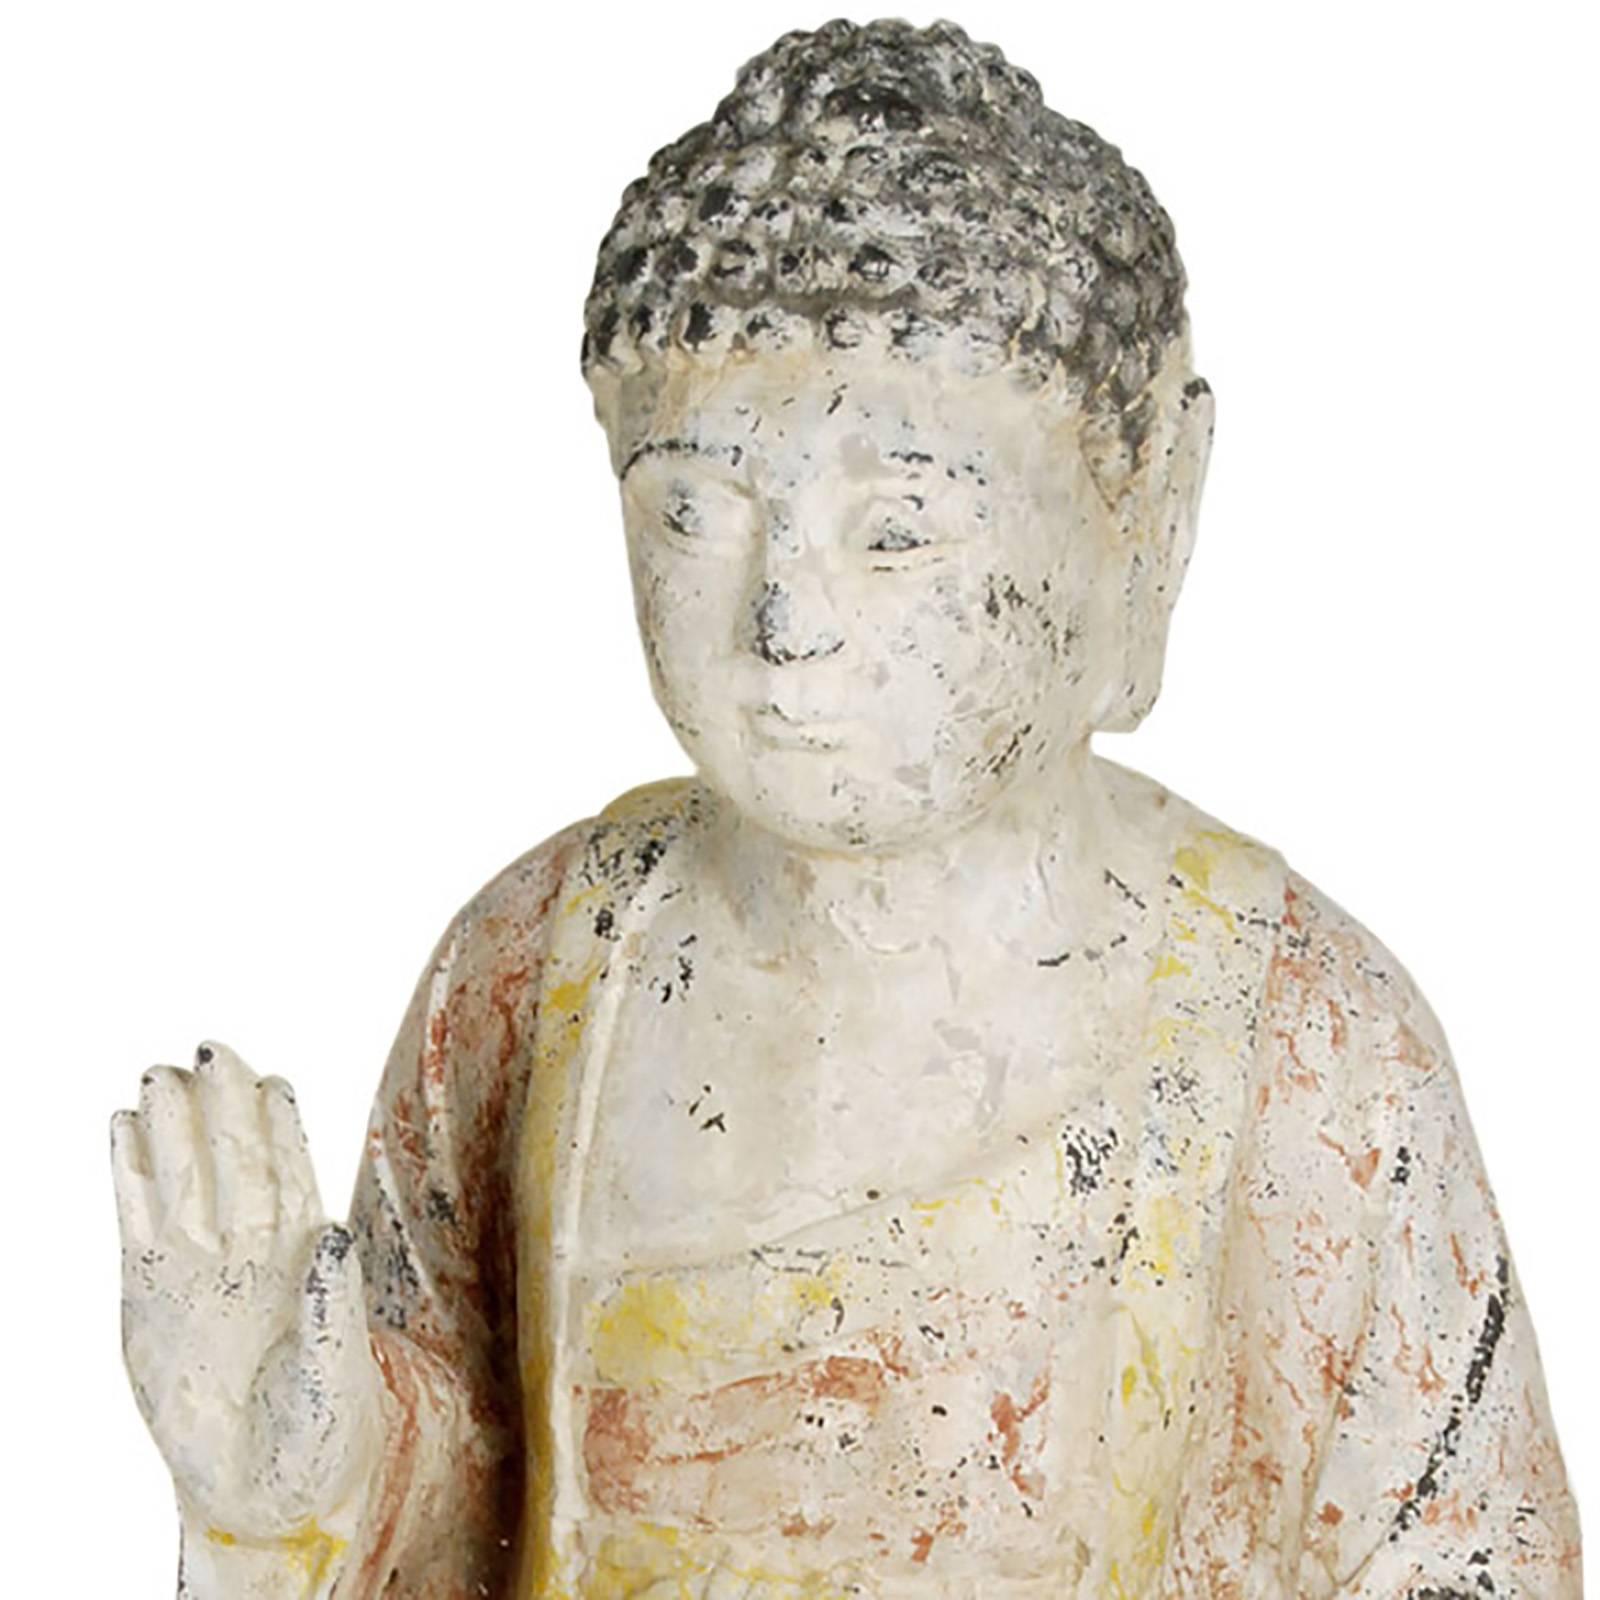 Shakyamuni, or just “Buddha,” is the original Buddhist sage from whom all Buddhist teachings and traditions were born. Shakymuni is easily recognized by his head of tight curls. This seated Shakyamuni is carved from a single piece of stone. He has